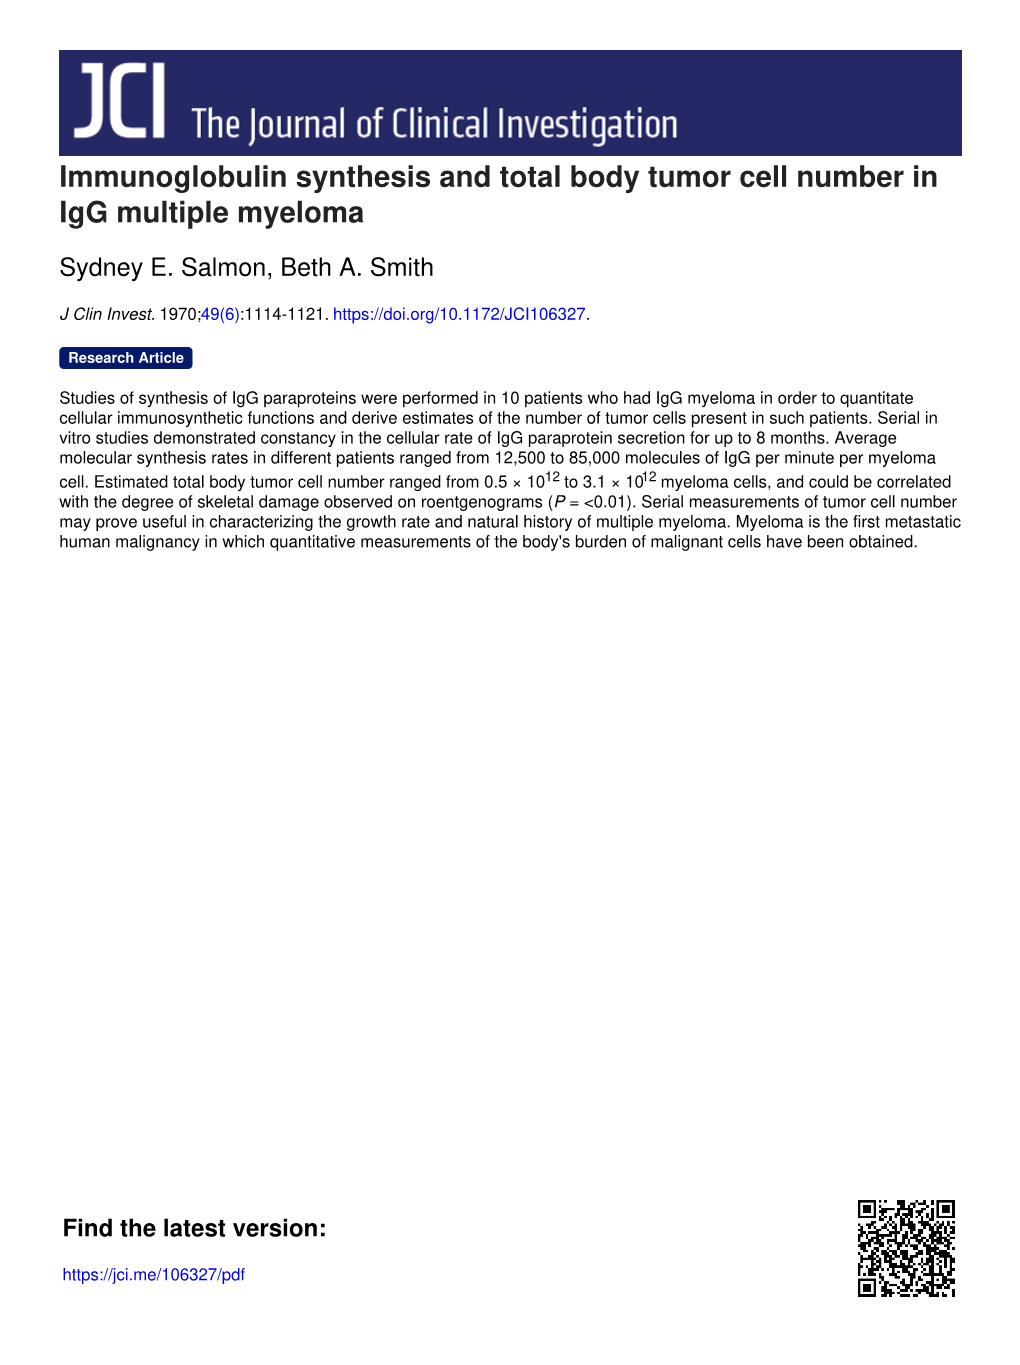 Immunoglobulin Synthesis and Total Body Tumor Cell Number in Igg Multiple Myeloma